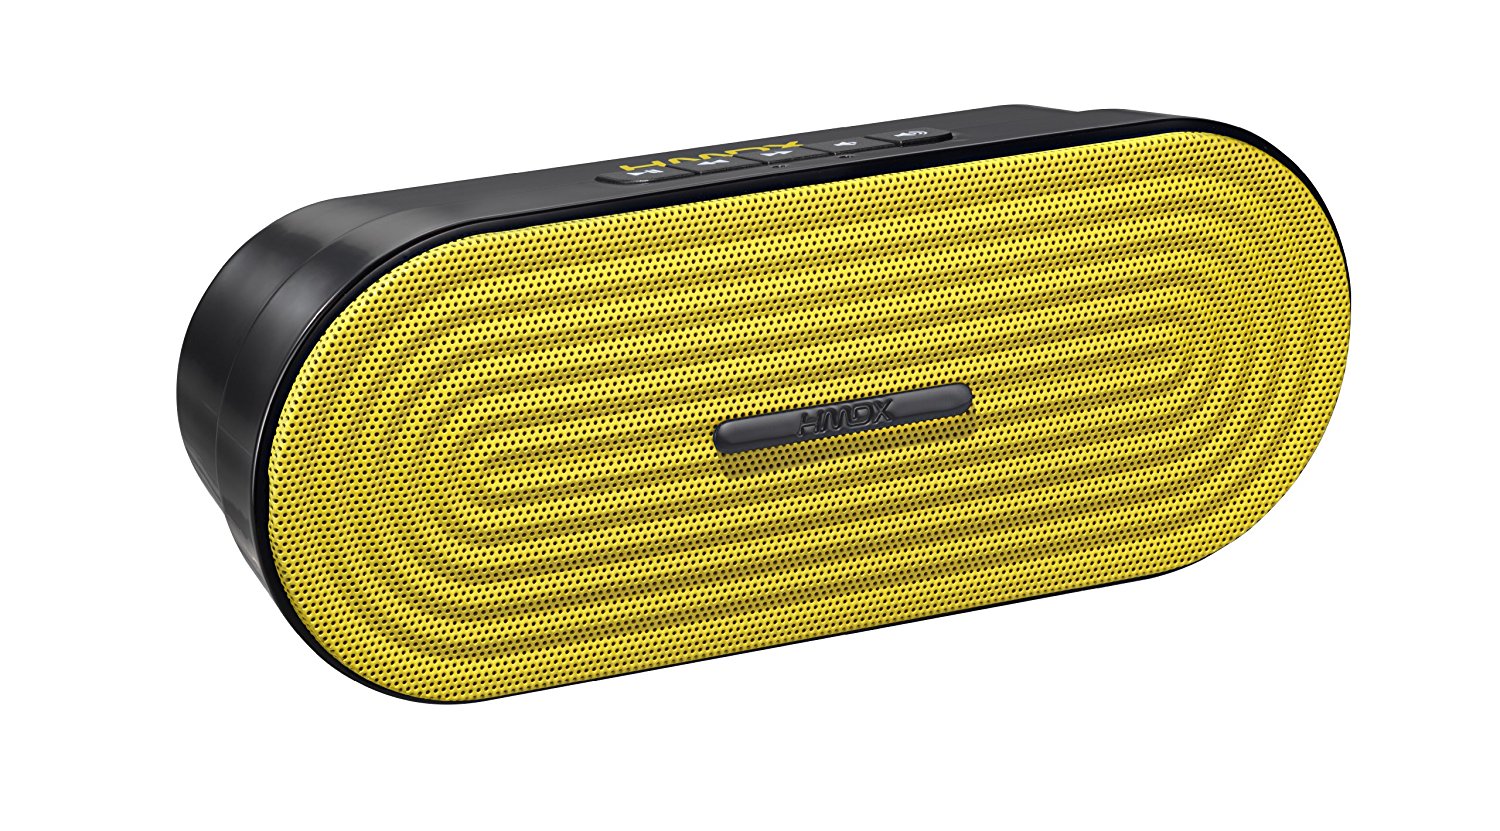 HMDX HX-P205YL Rave Portable Rechargeable Wireless Speaker, Yellow - Aux, Bluetooth (30'), 4hrs battery life